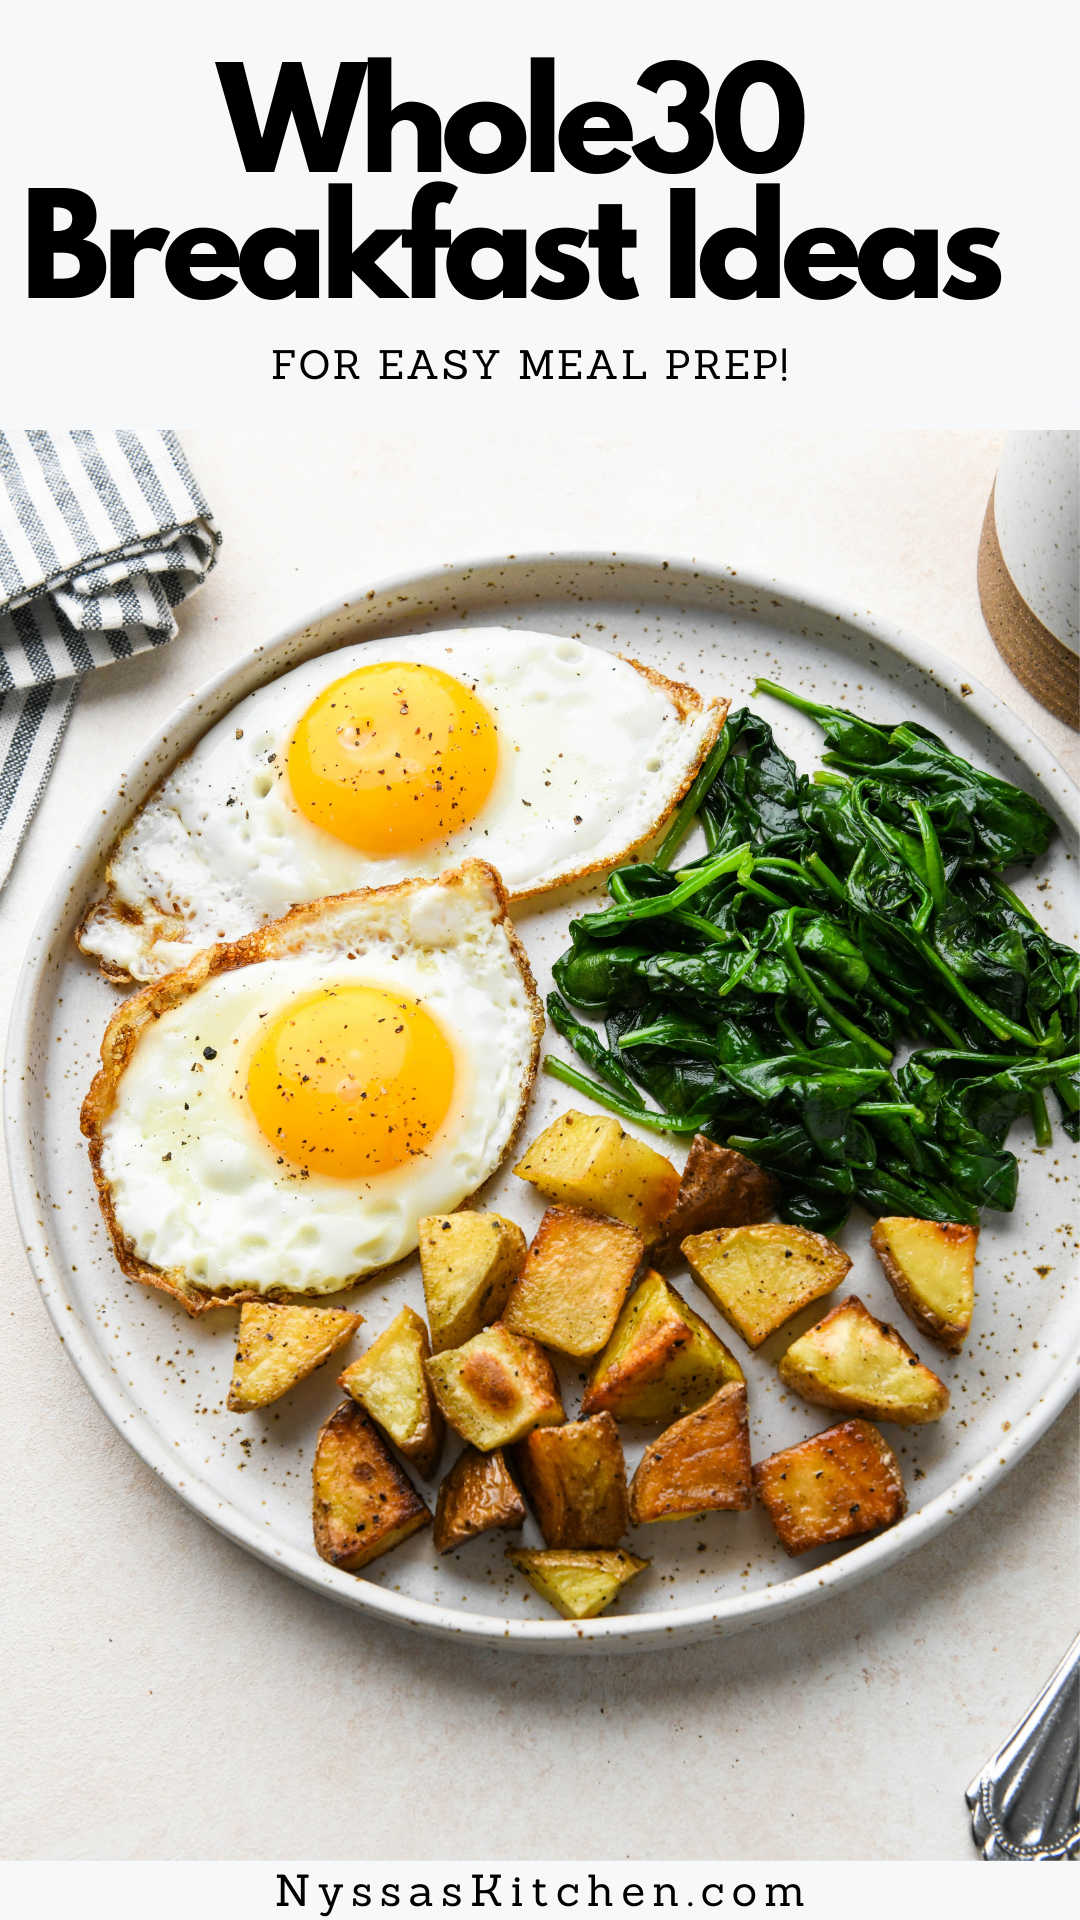 Finding easy whole30 breakfast ideas to meal plan for your 30 days in the program is the key to setting yourself up for success! In this post I share some of my typical, simple breakfast combinations made with clean protein, veggies, and healthy fats so you can wake up inspired every morning.